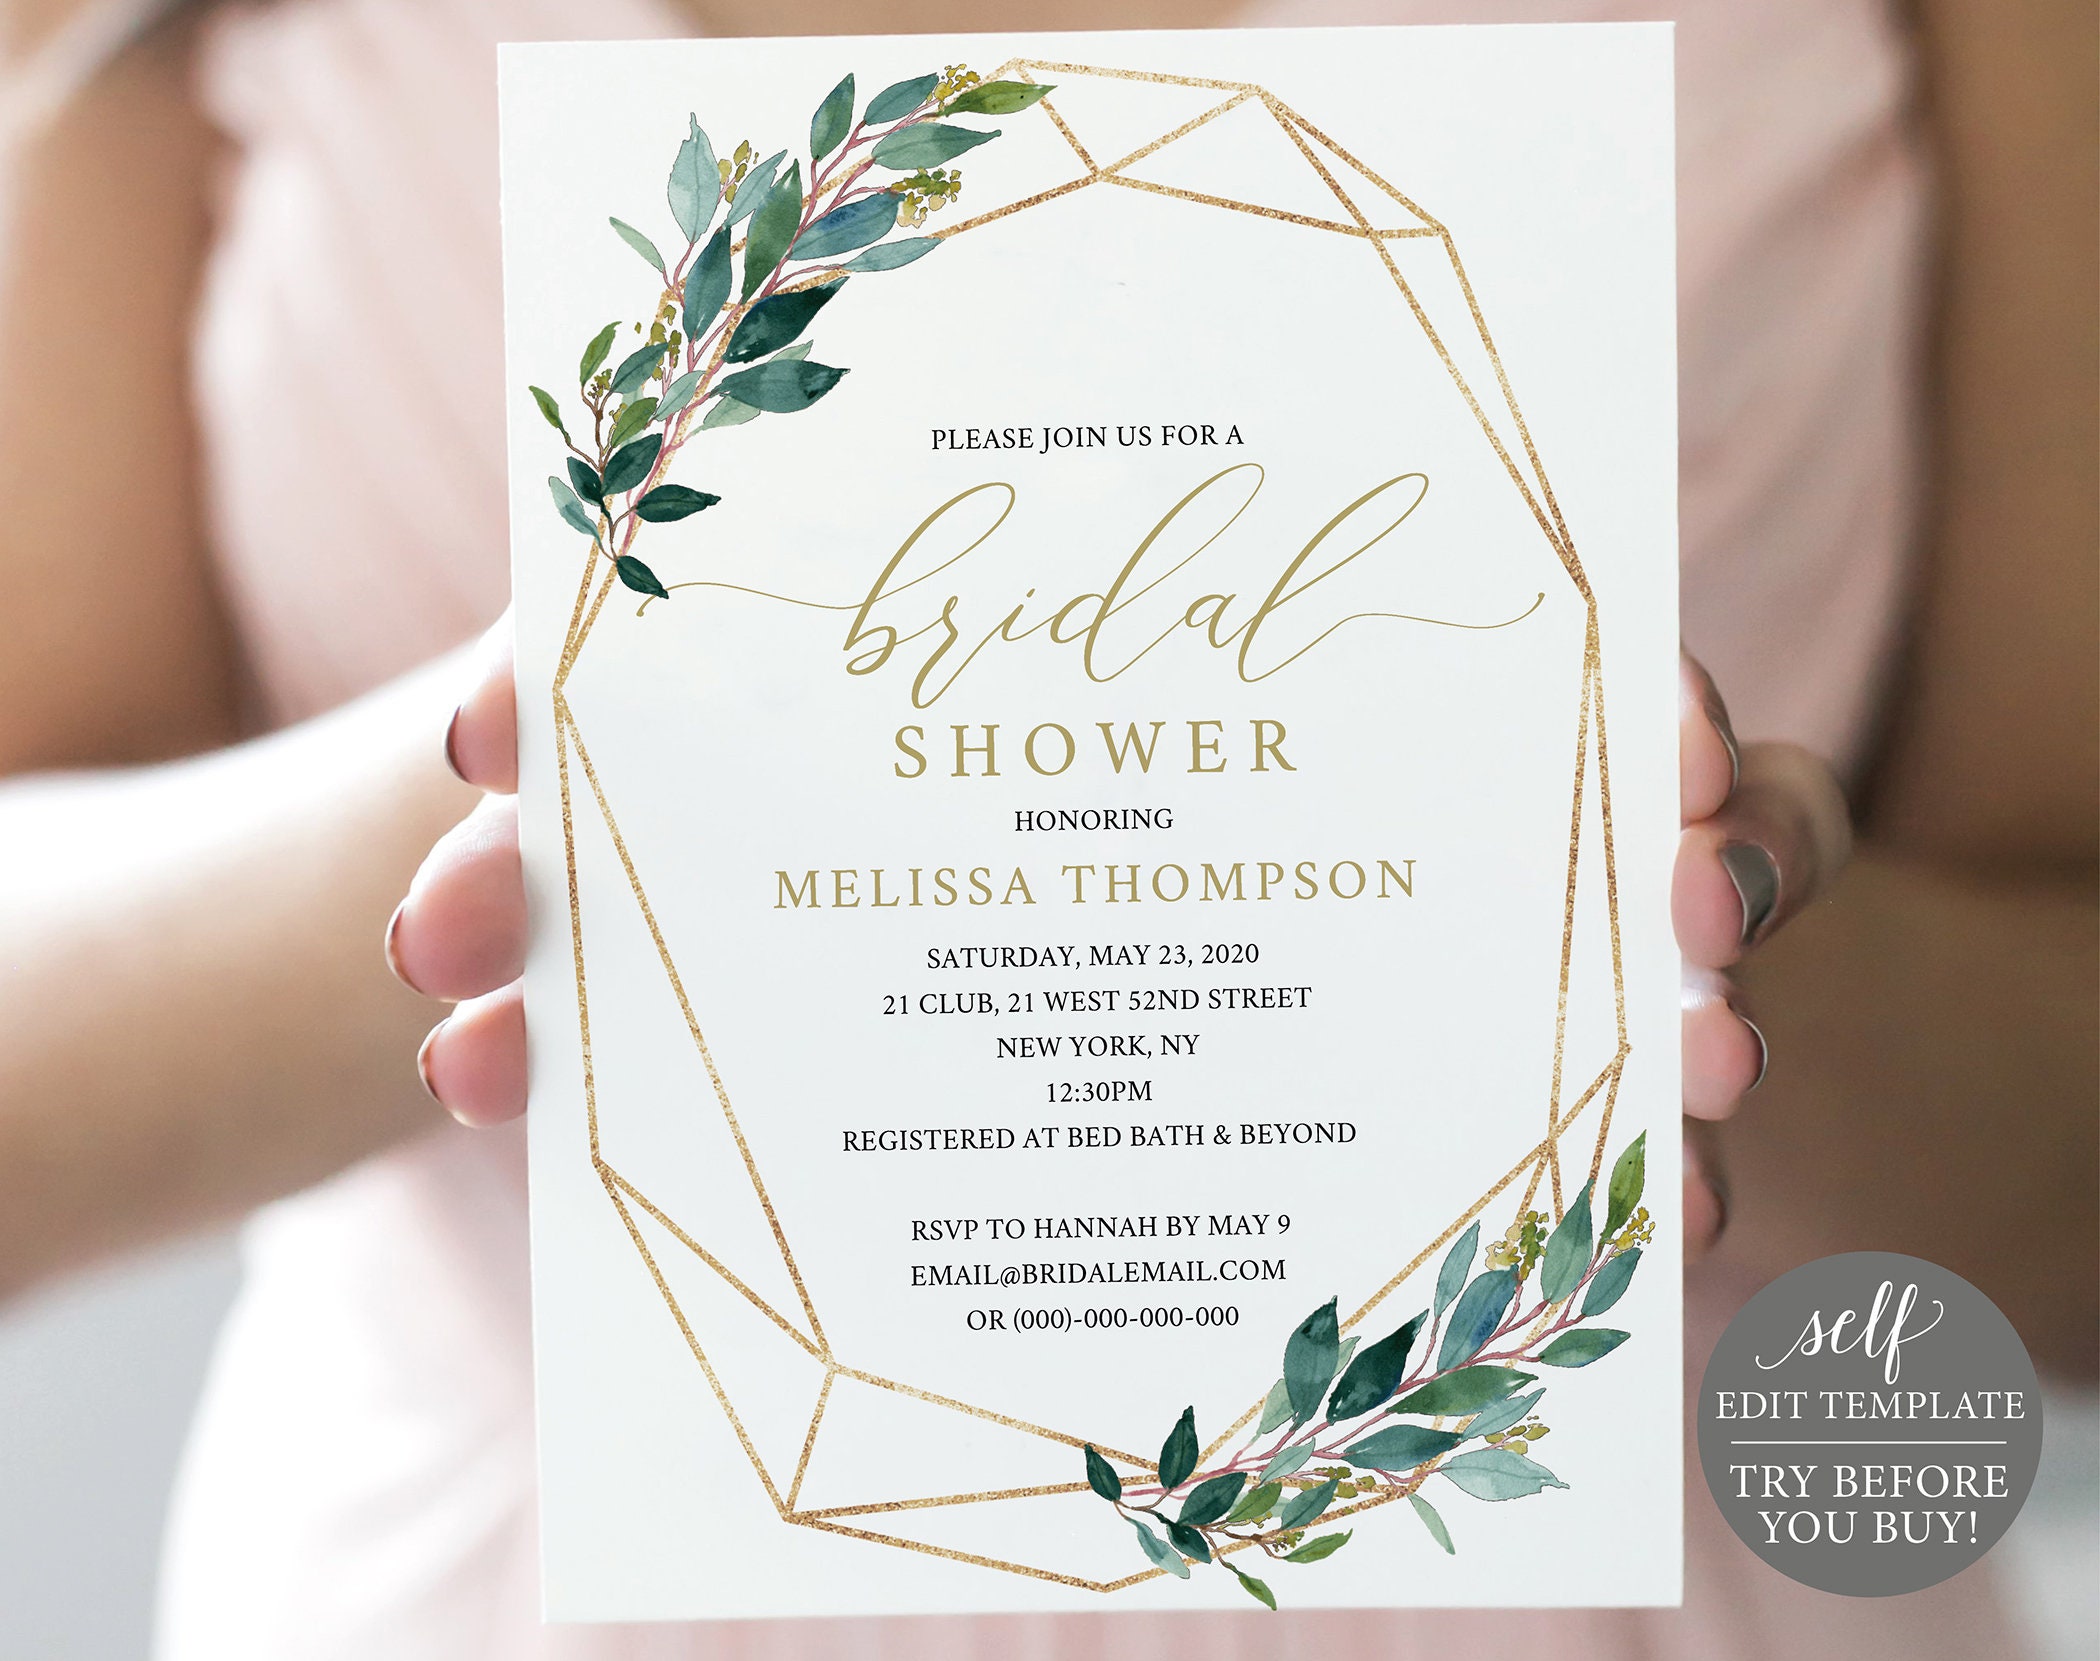 TRY BEFORE You BUY Bridal Shower Invitation Template 100 Etsy